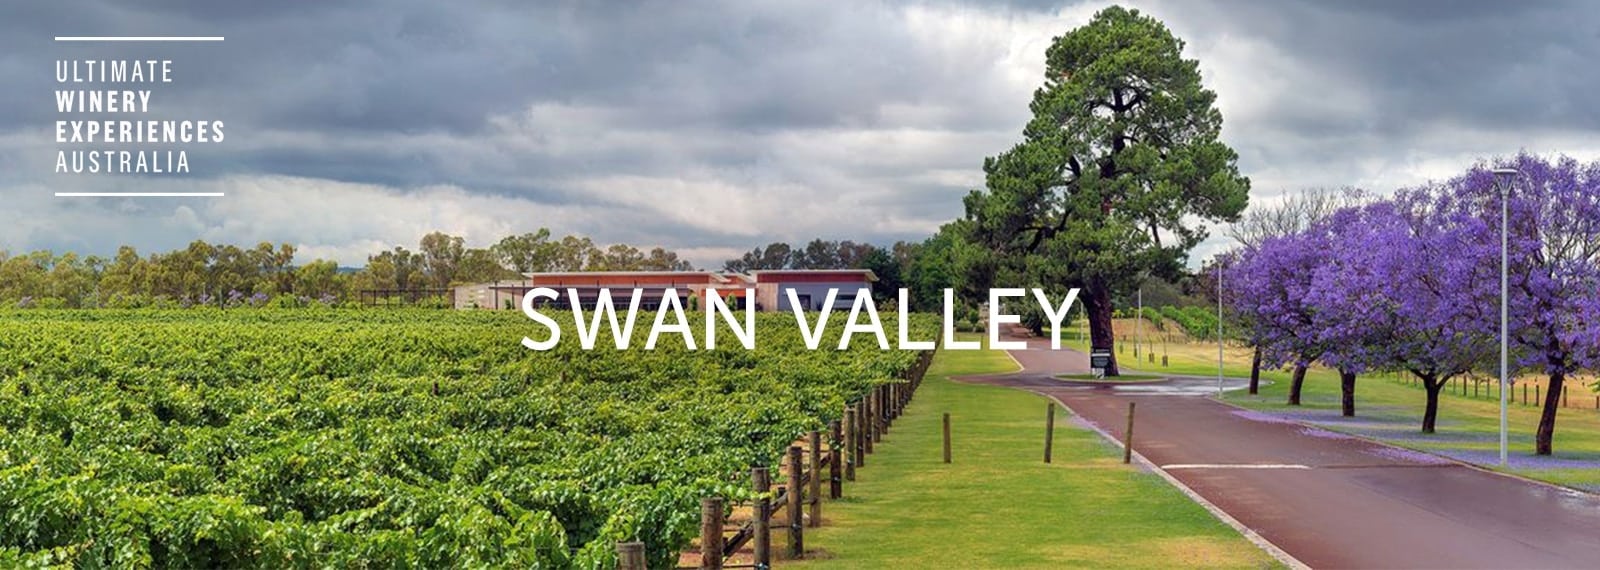 swan valley wine tours perth